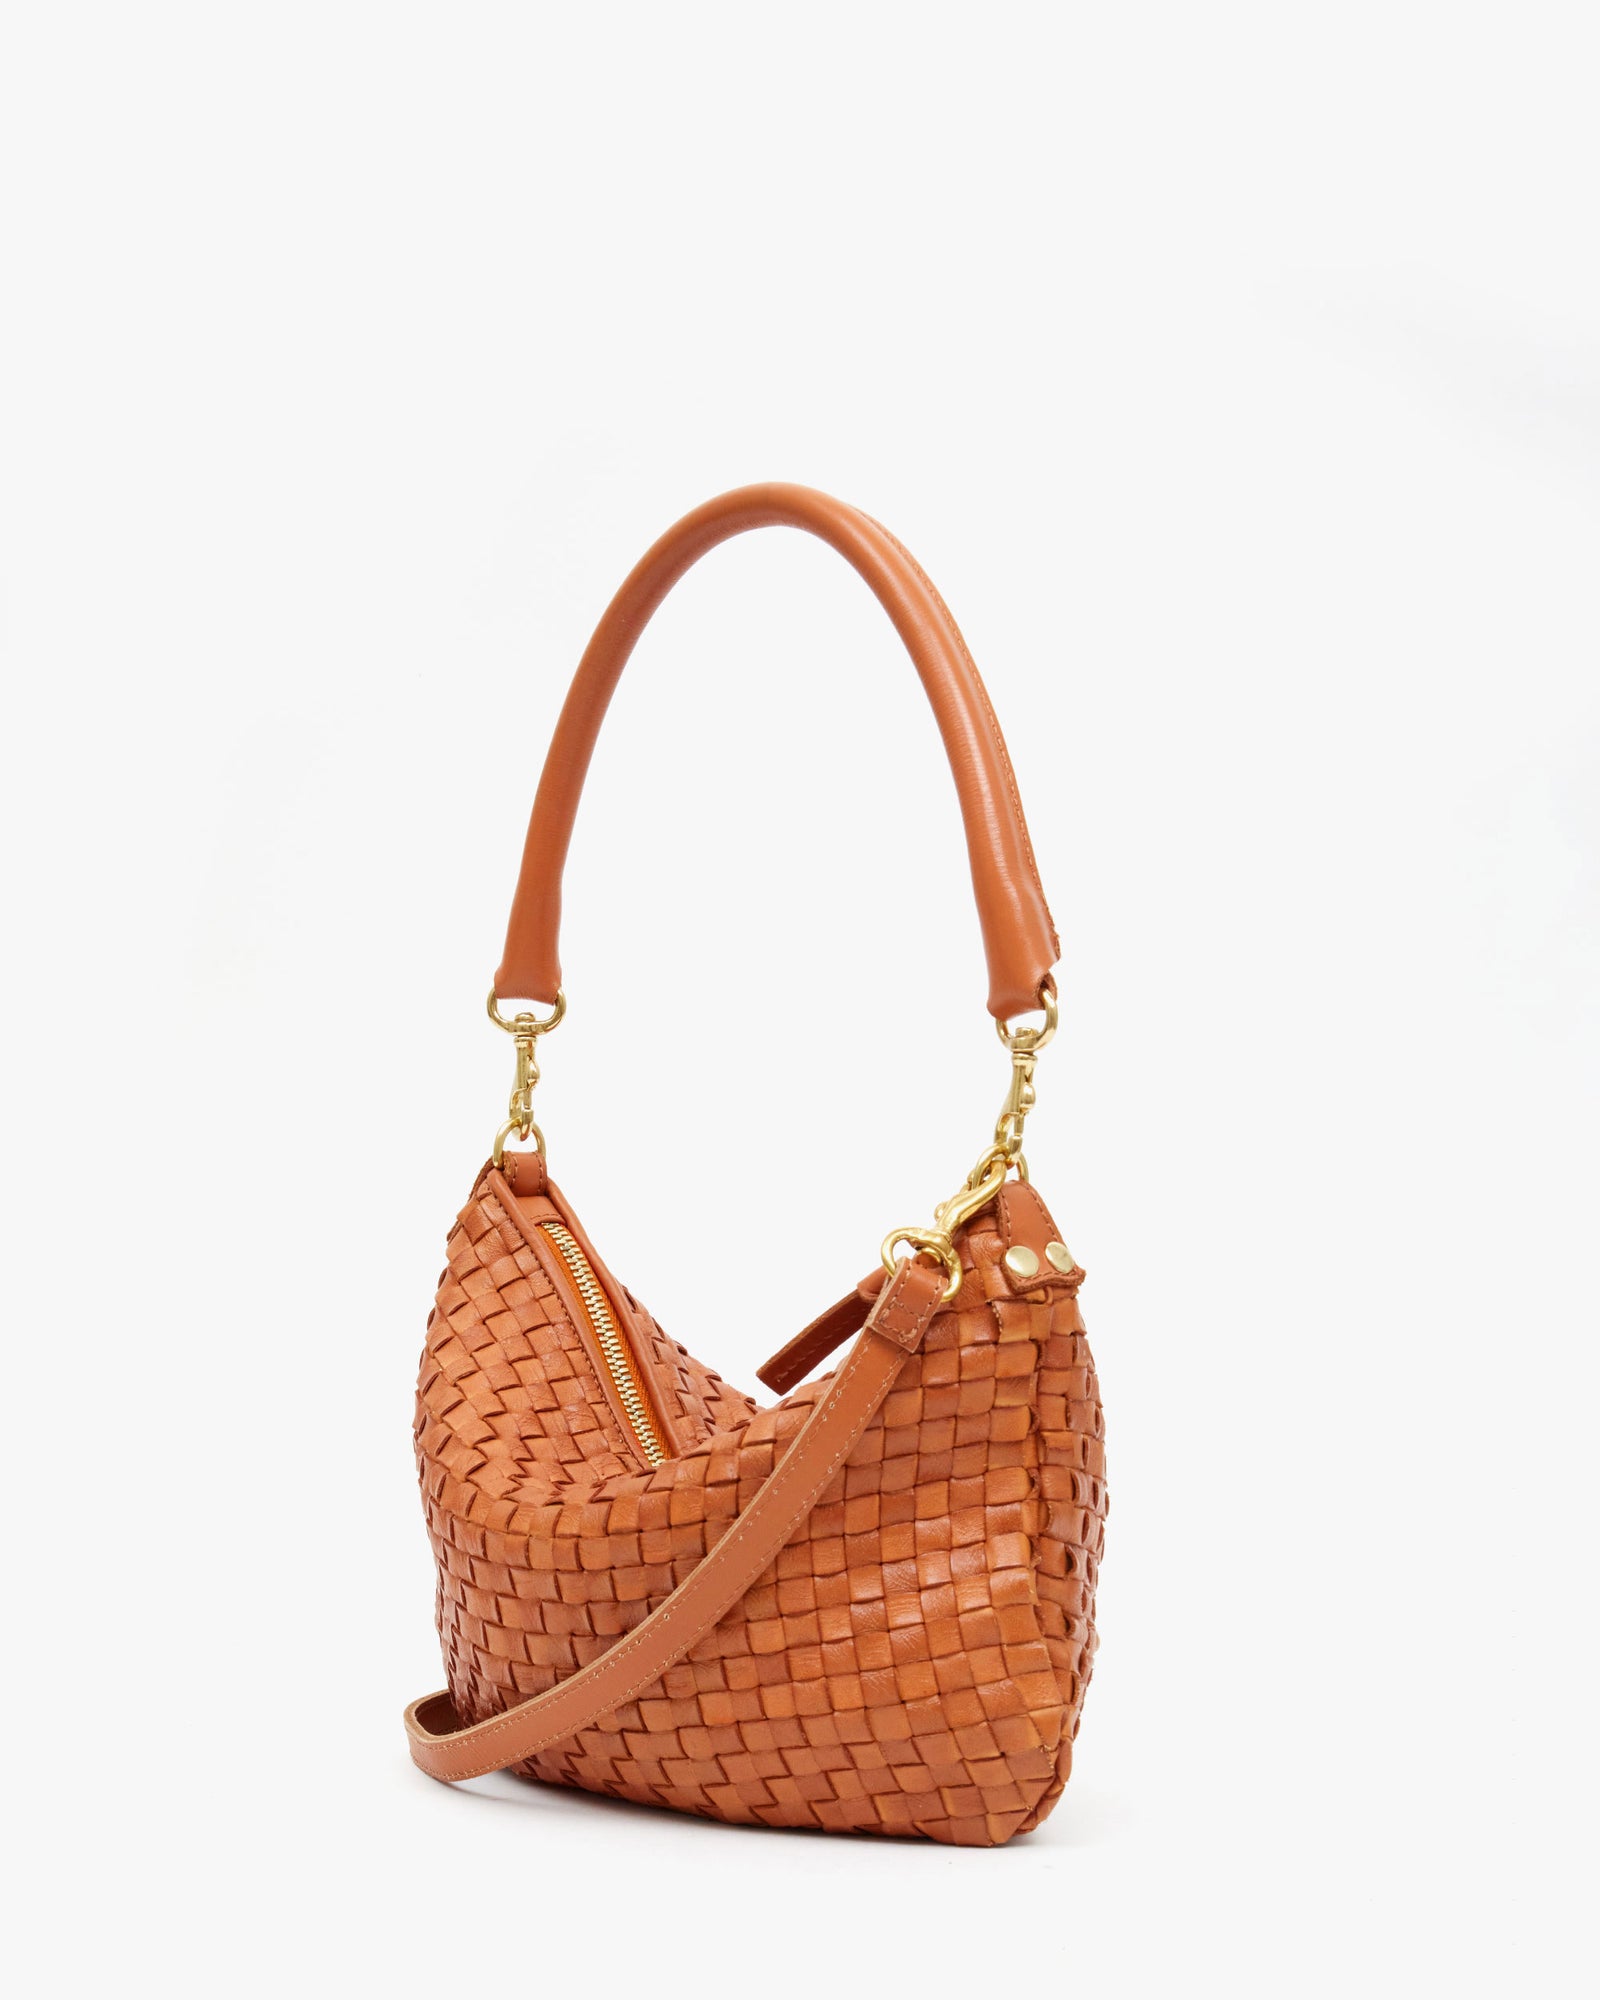 Side view of the Petit Moyen Messenger in Natural Woven